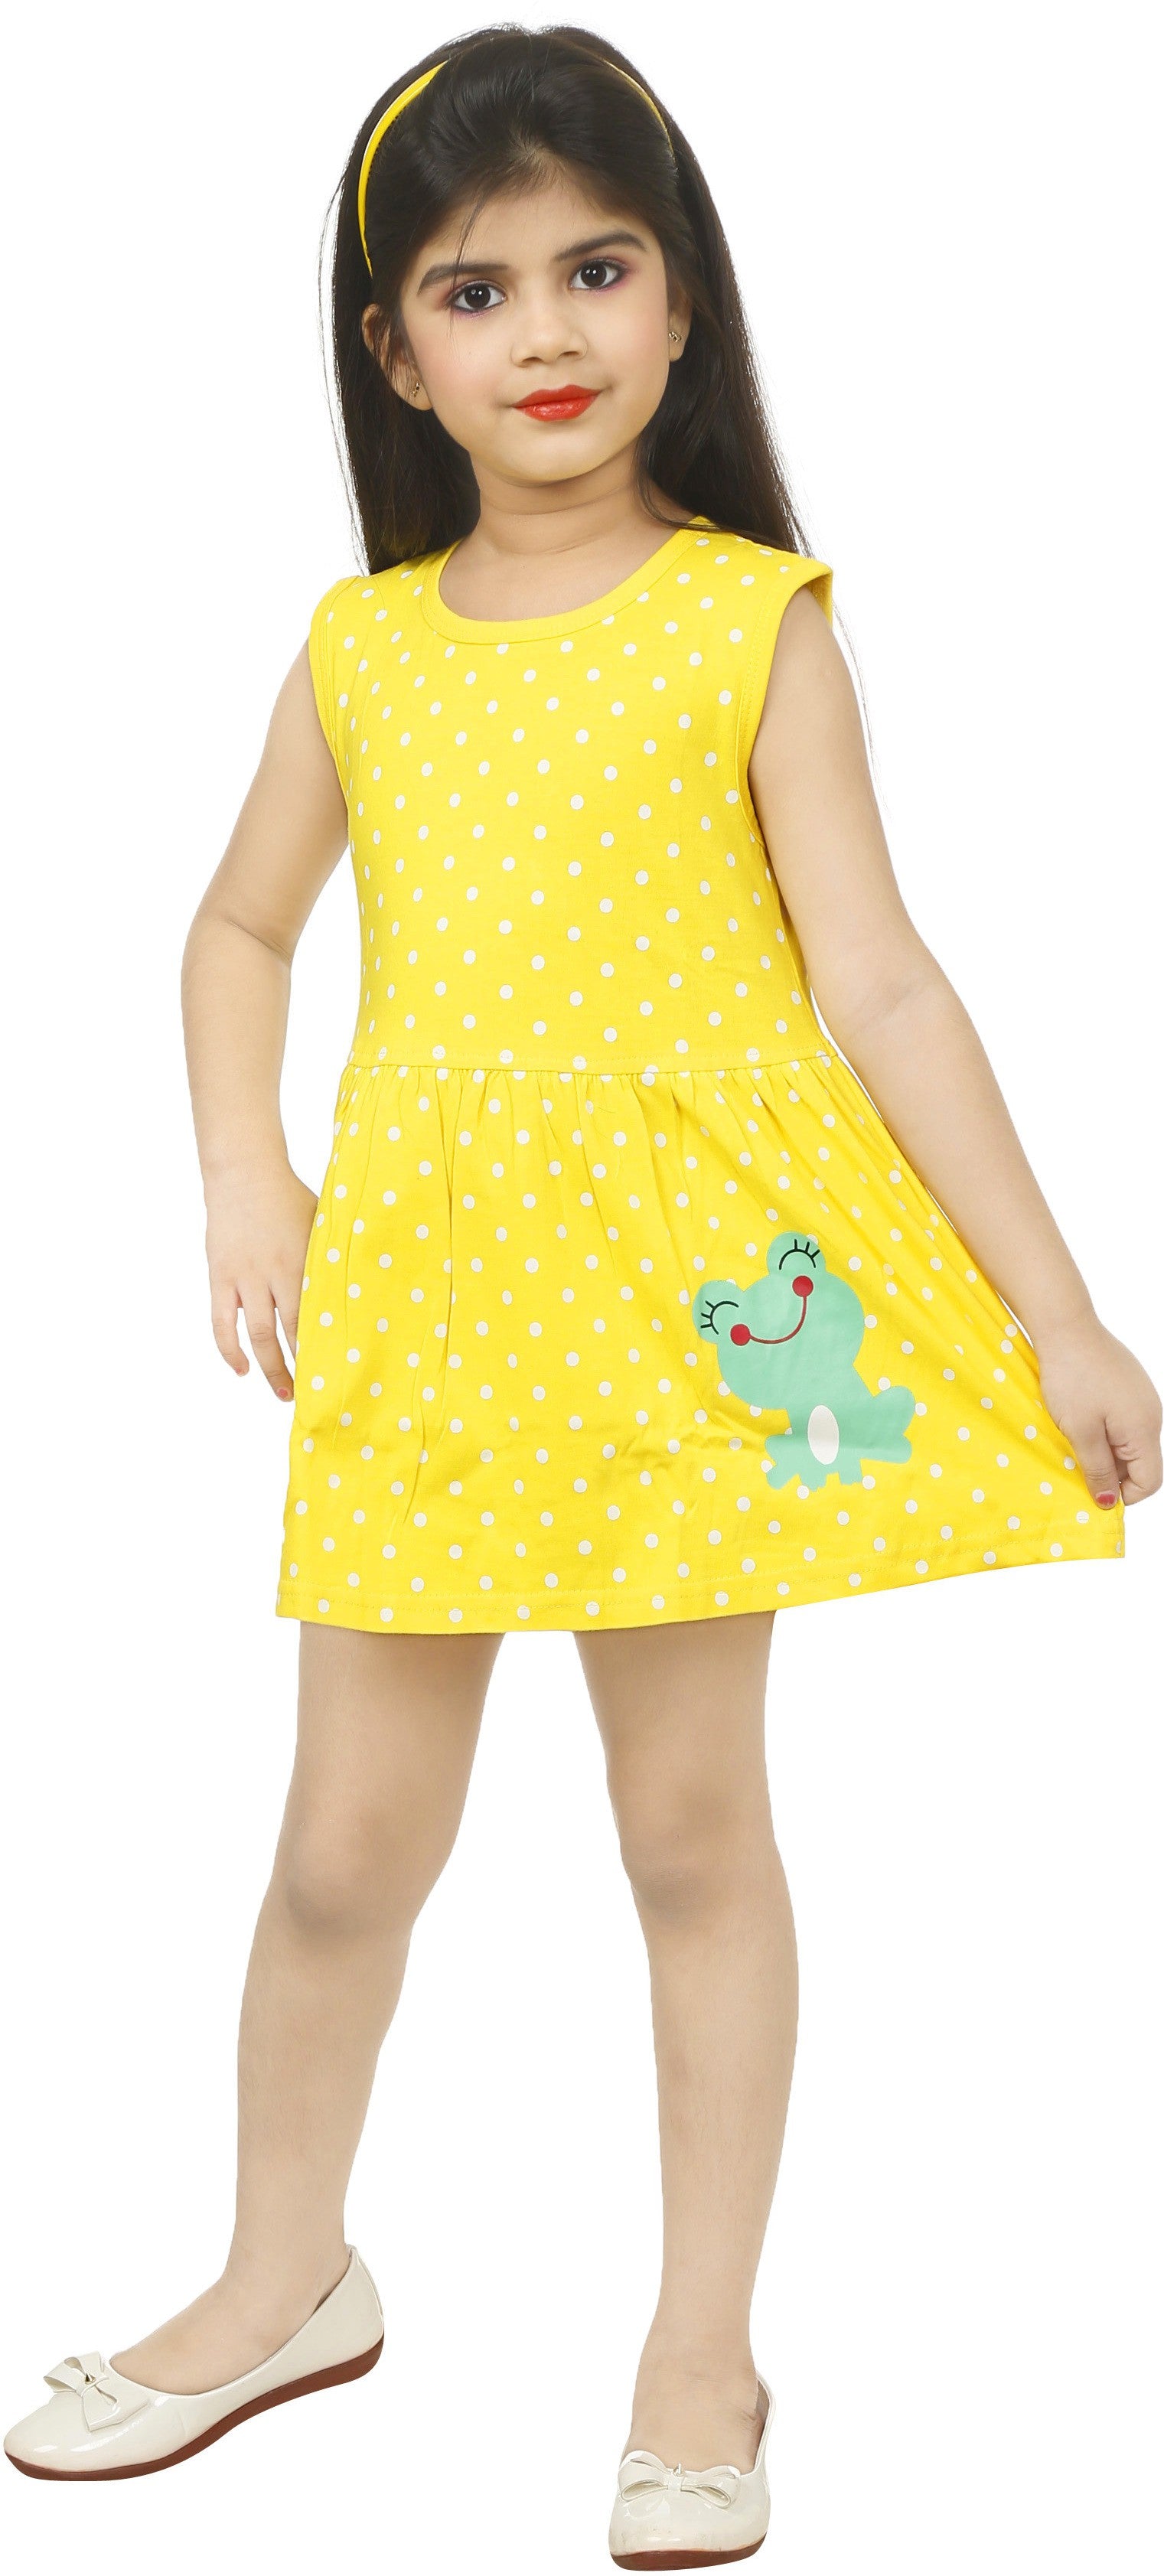 Lavany Little Girls Dresses Cute Baby Sundress Lemon Print Casual Party Dress  Clothes : Amazon.in: Clothing & Accessories